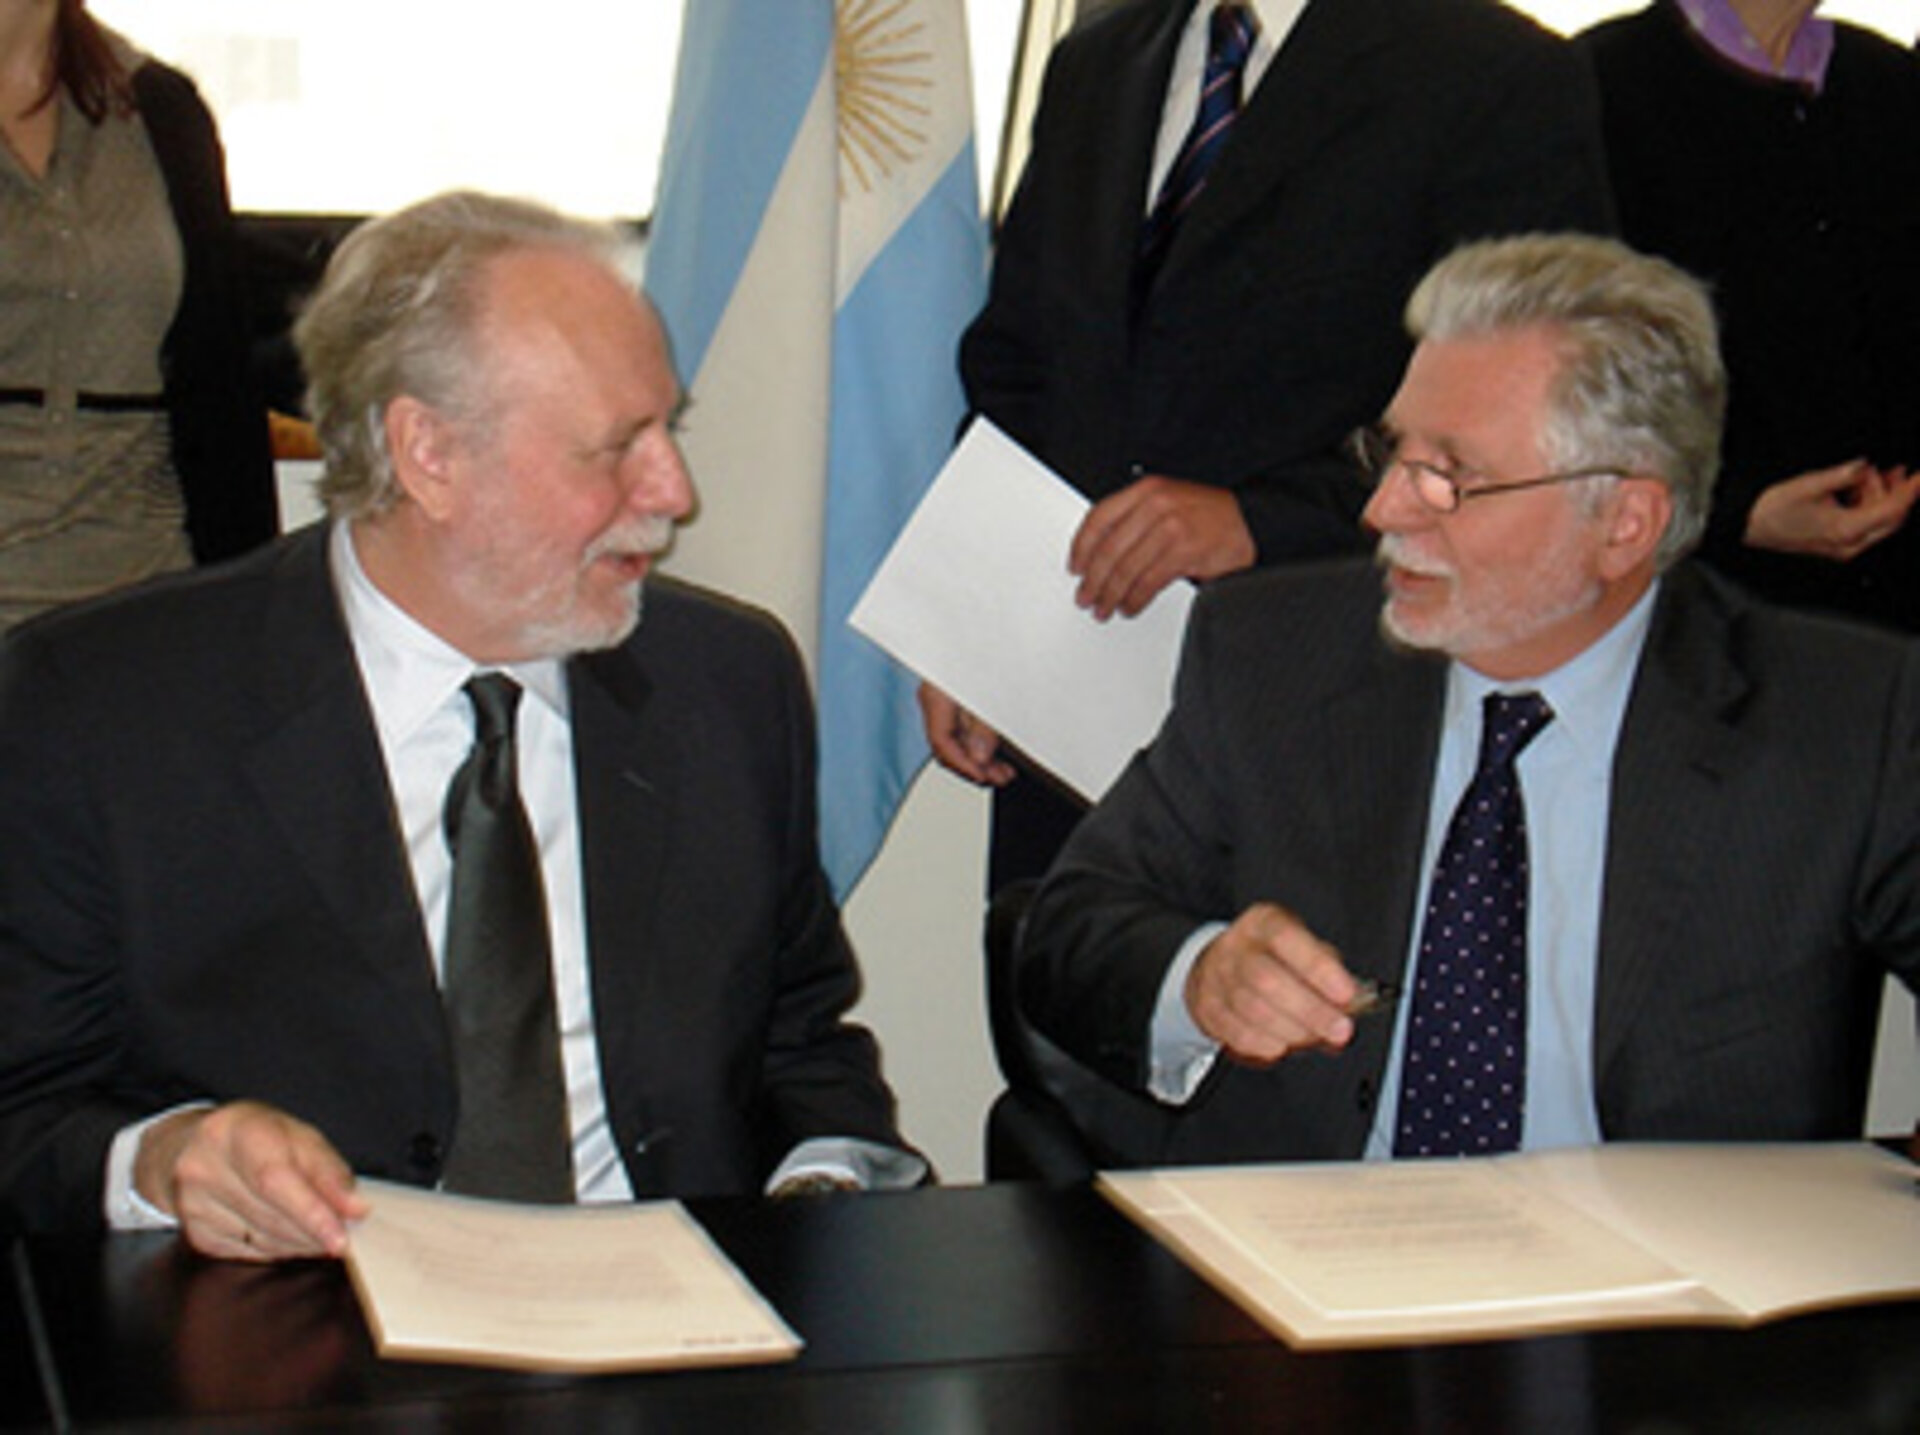 René Oosterlinck (left) and Victorio Taccetti signing the agreement